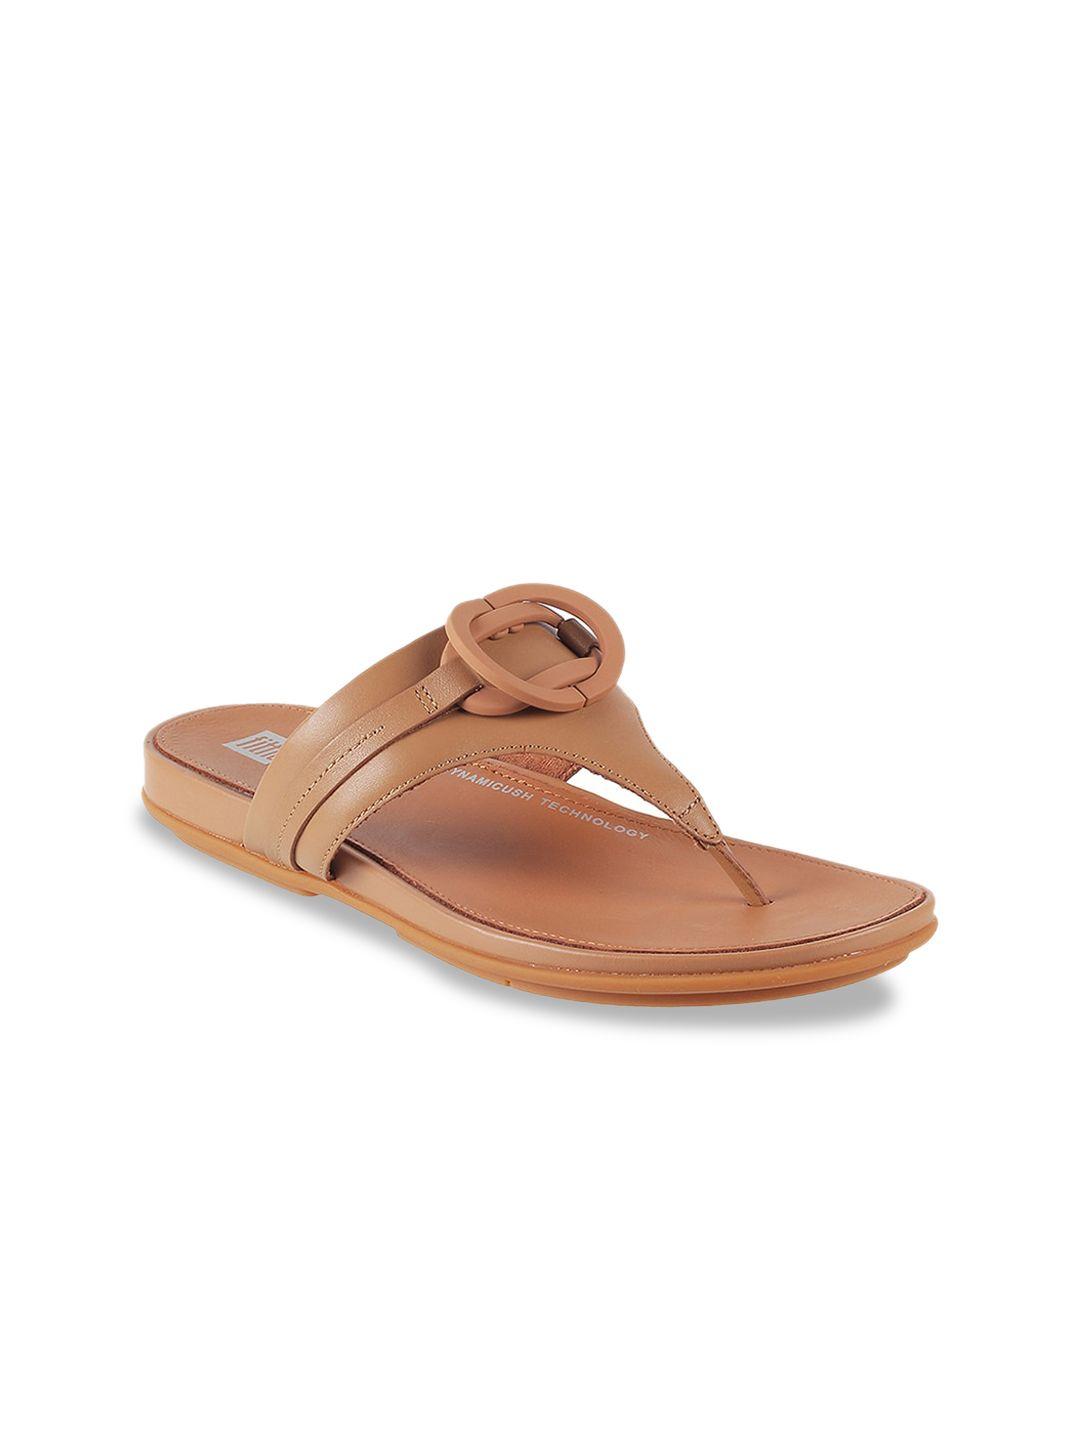 fitflop buckle detail leather open toe flats